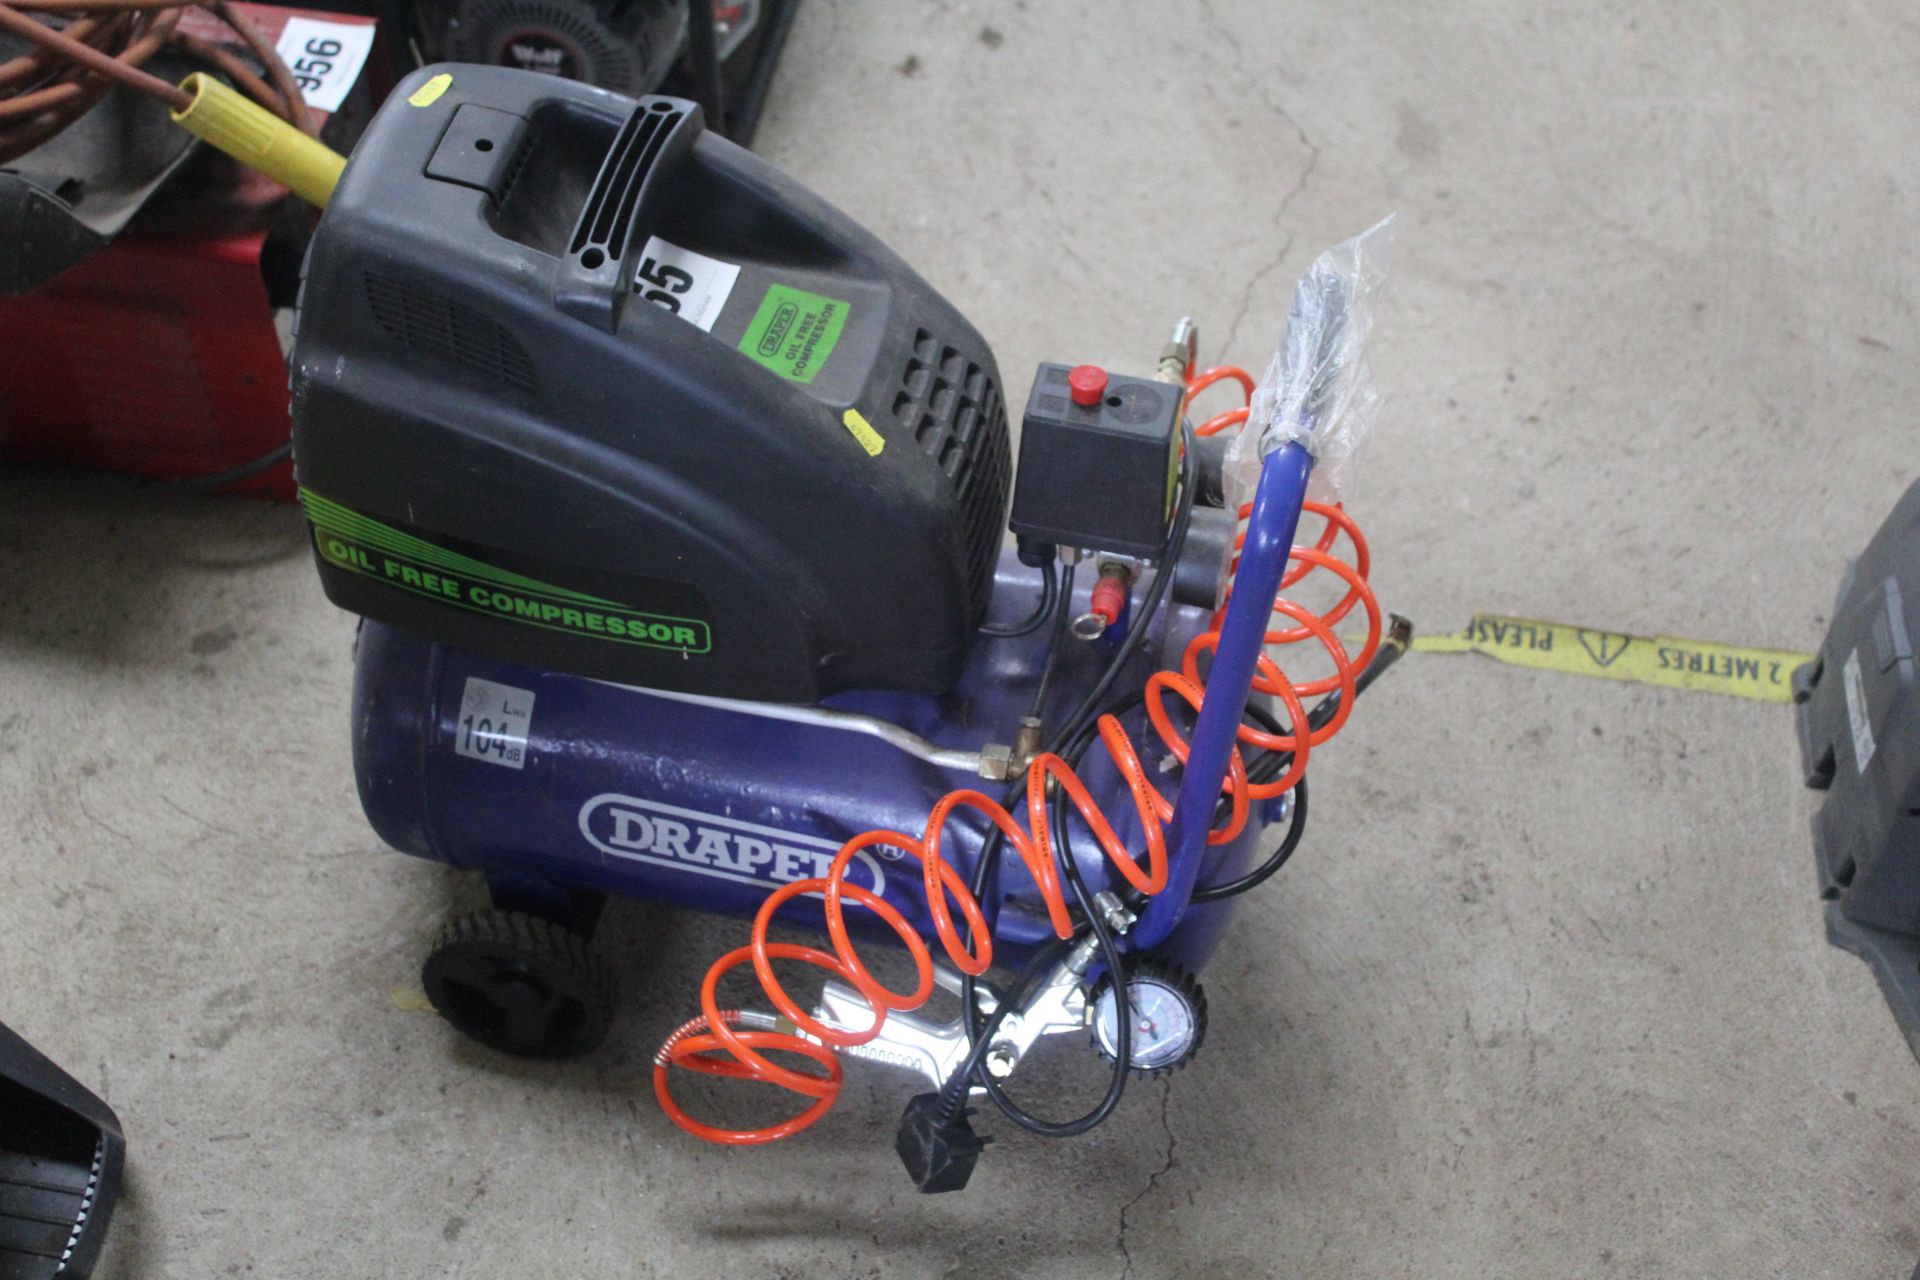 Draper compressor. With hose and inflation gun.